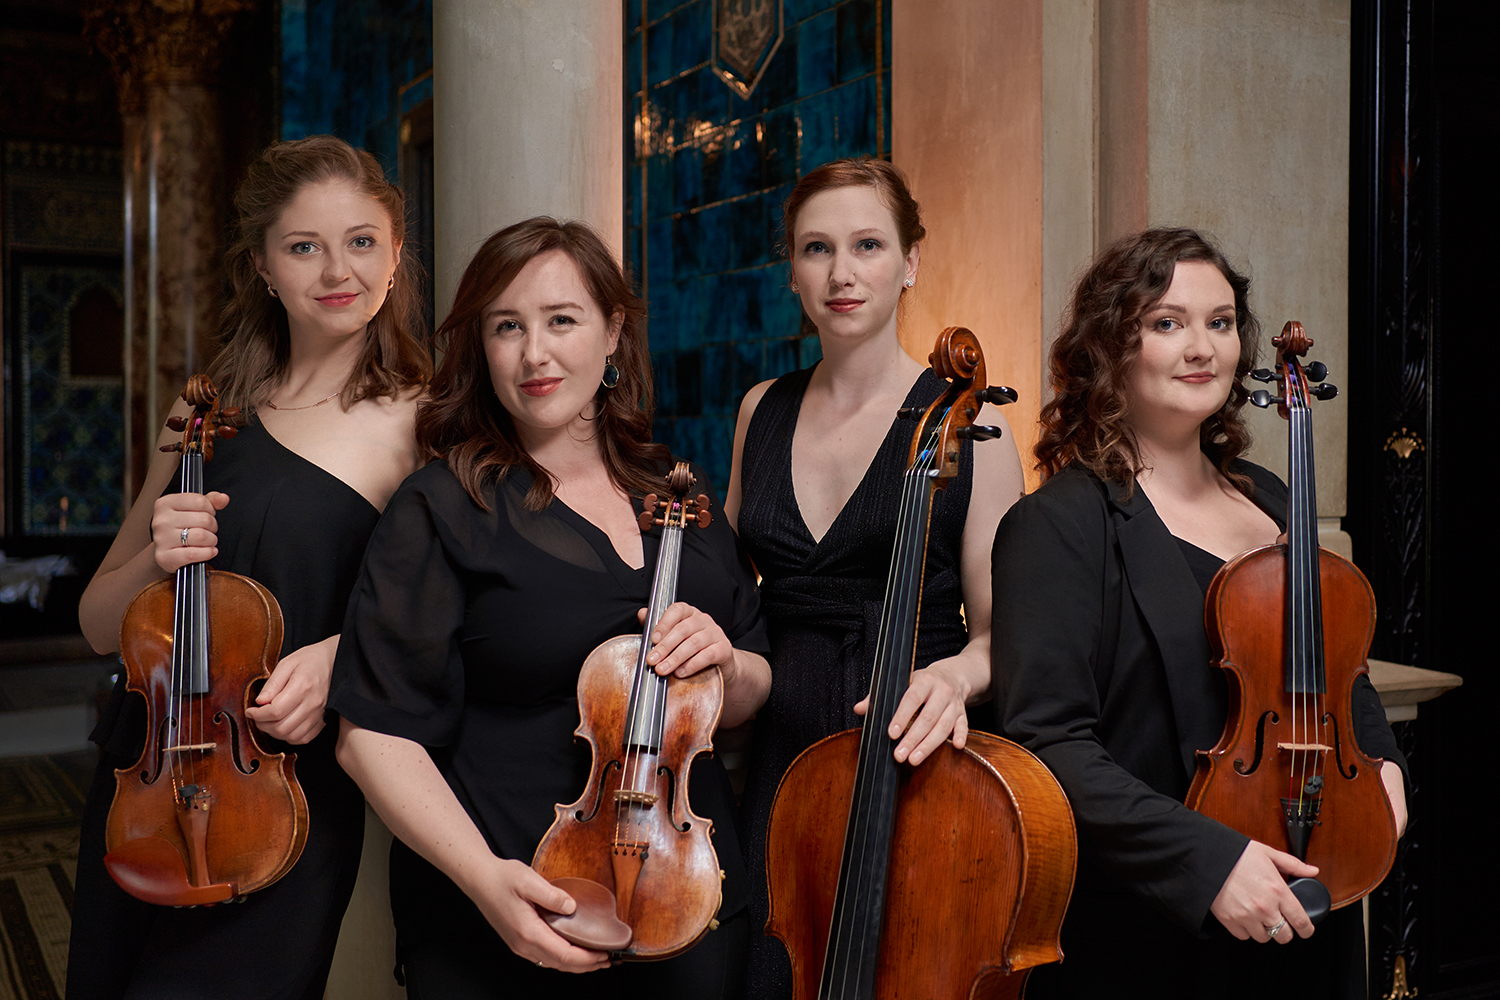 Four women musicians who comprise Alkyona Quartet holding their string instruments and wearing black